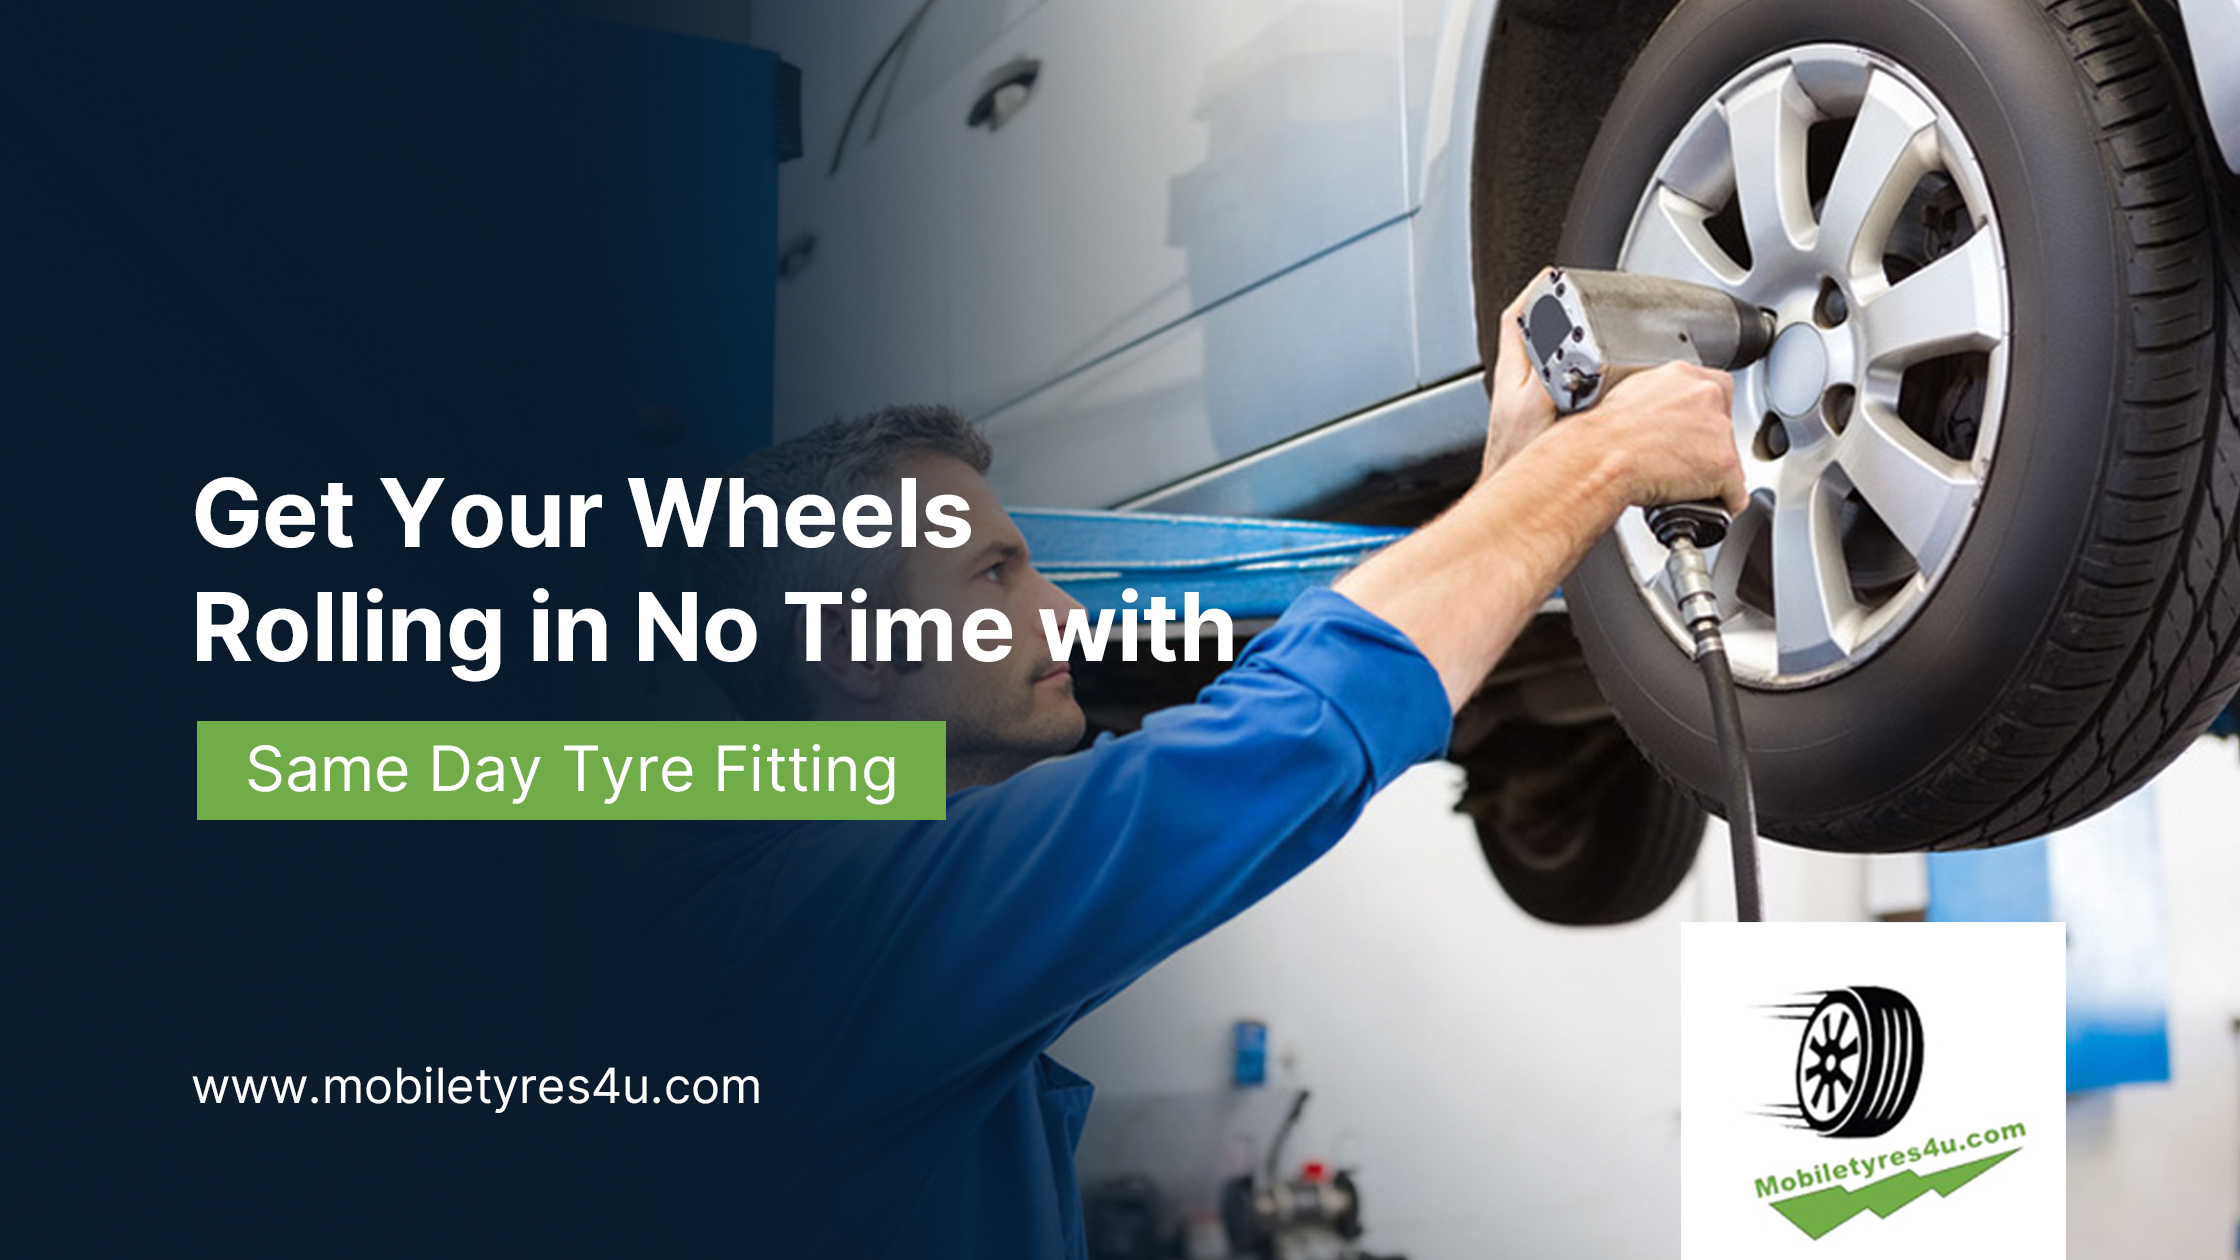 Blog_Same Day Tyre Fitting: Professional Service At Your Doorstep